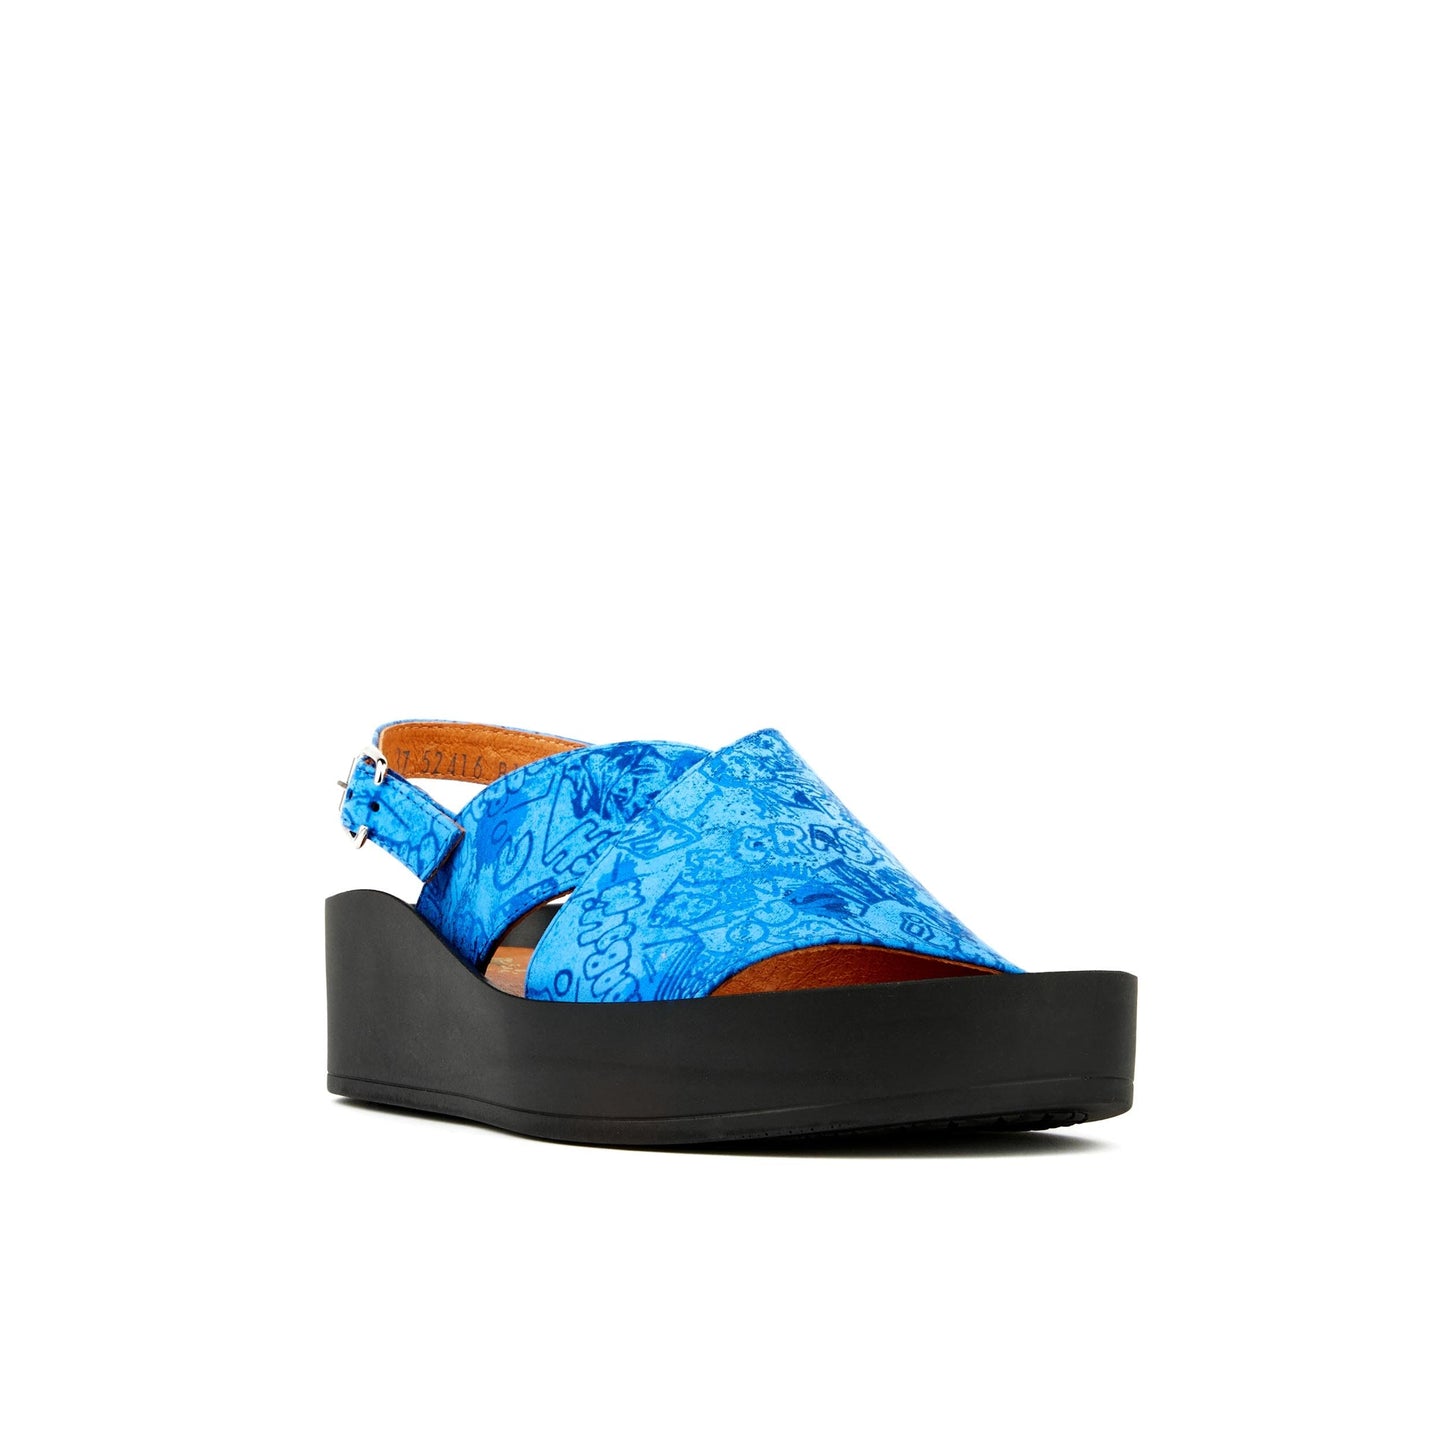 Melody - Bright Blue Womens Sandals Embassy London 